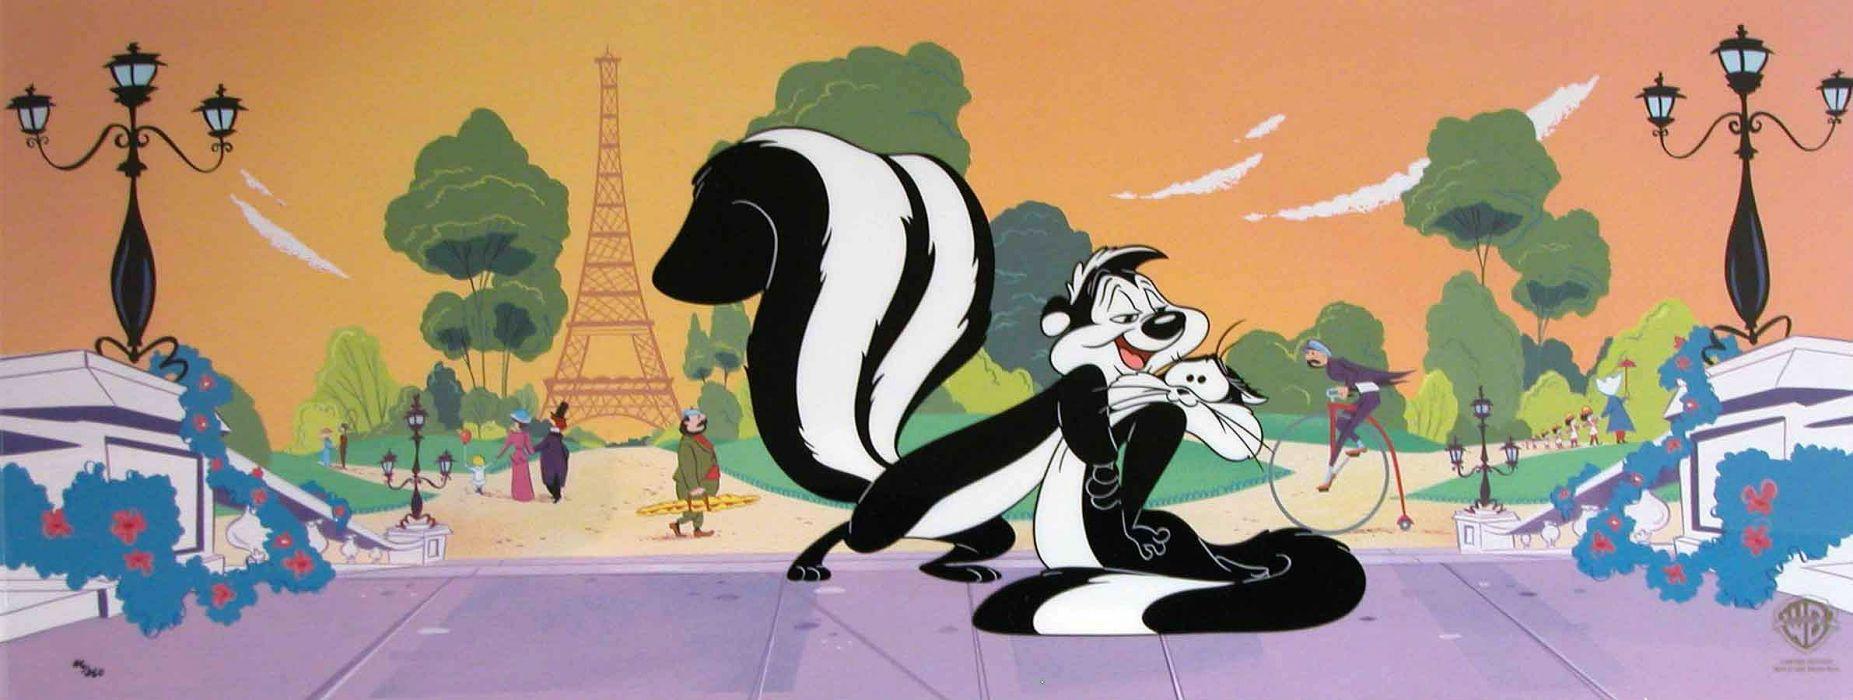 PEPE LE PEW Looney Tunes french france comedy family animation